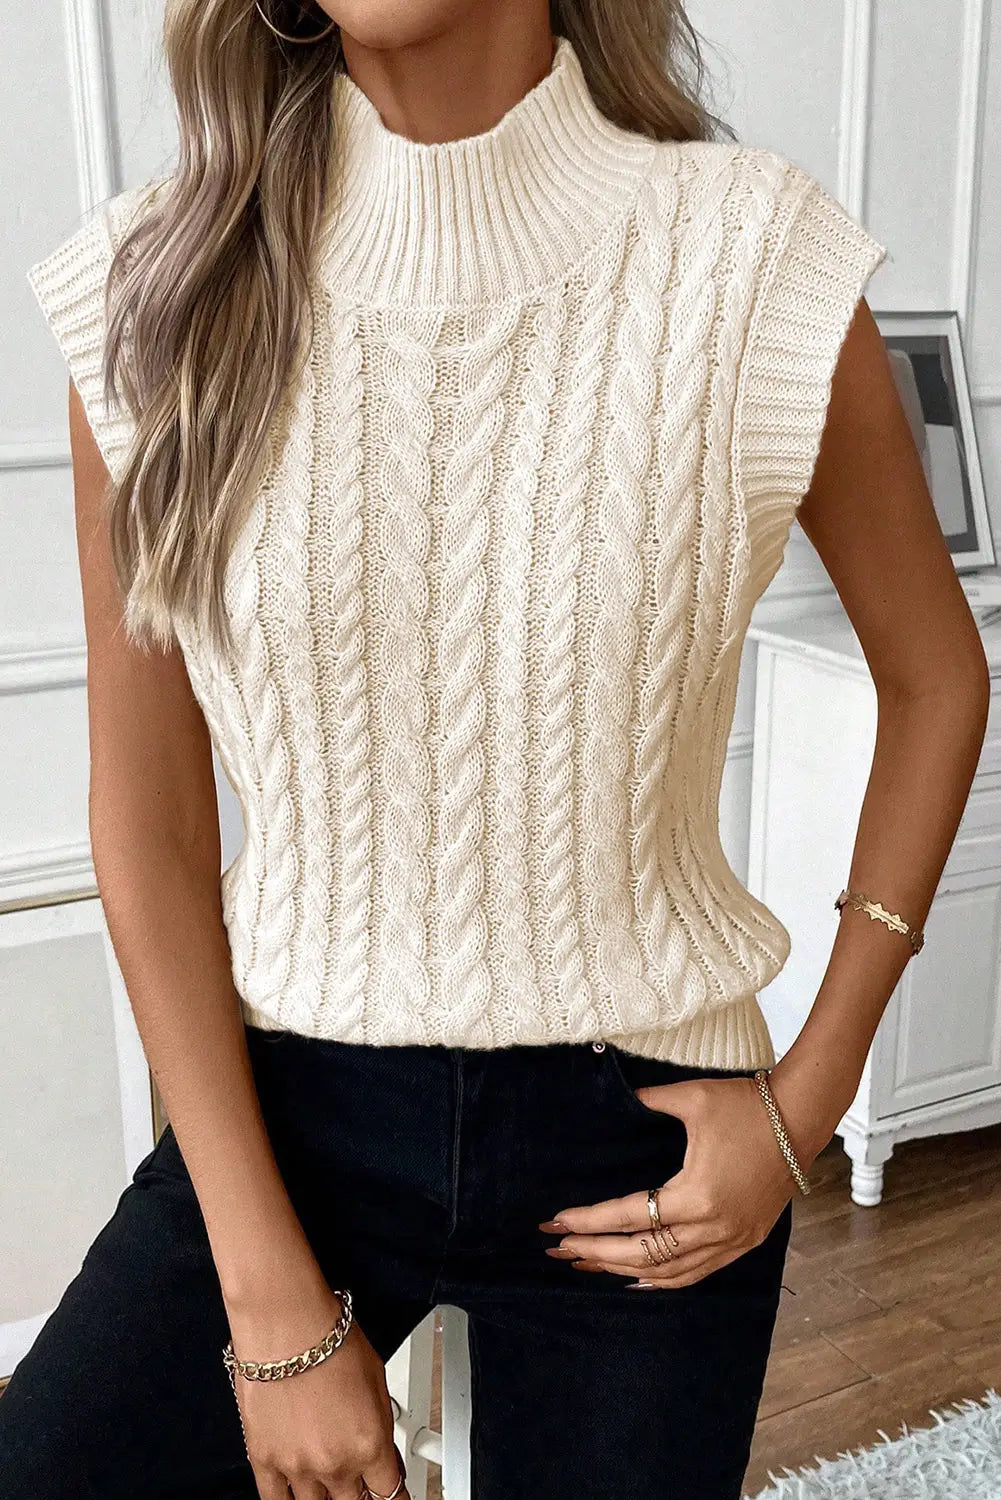 Oatmeal cable knit high neck sweater vest - l / 100% acrylic - sweaters & cardigans